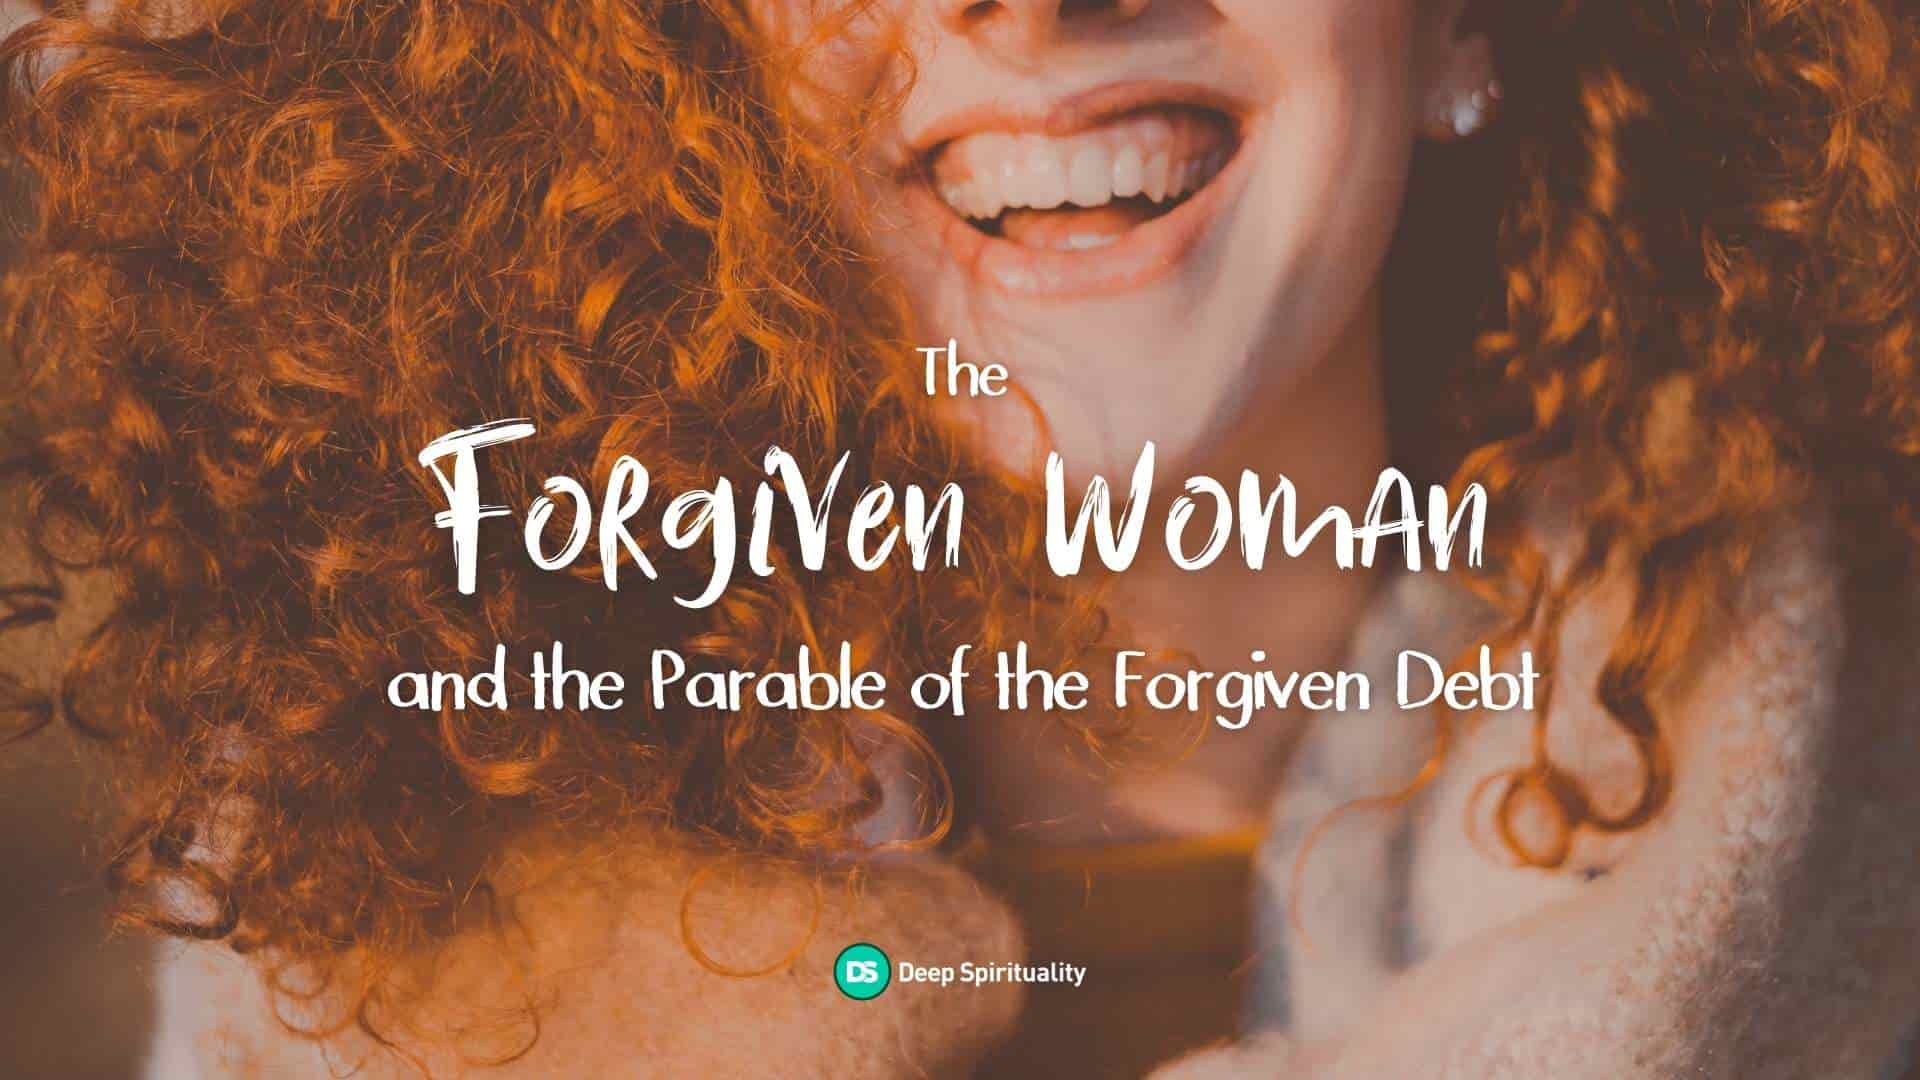 The Forgiven Woman and the Parable of the Forgiven Debt: How God’s Love Becomes Personal 22